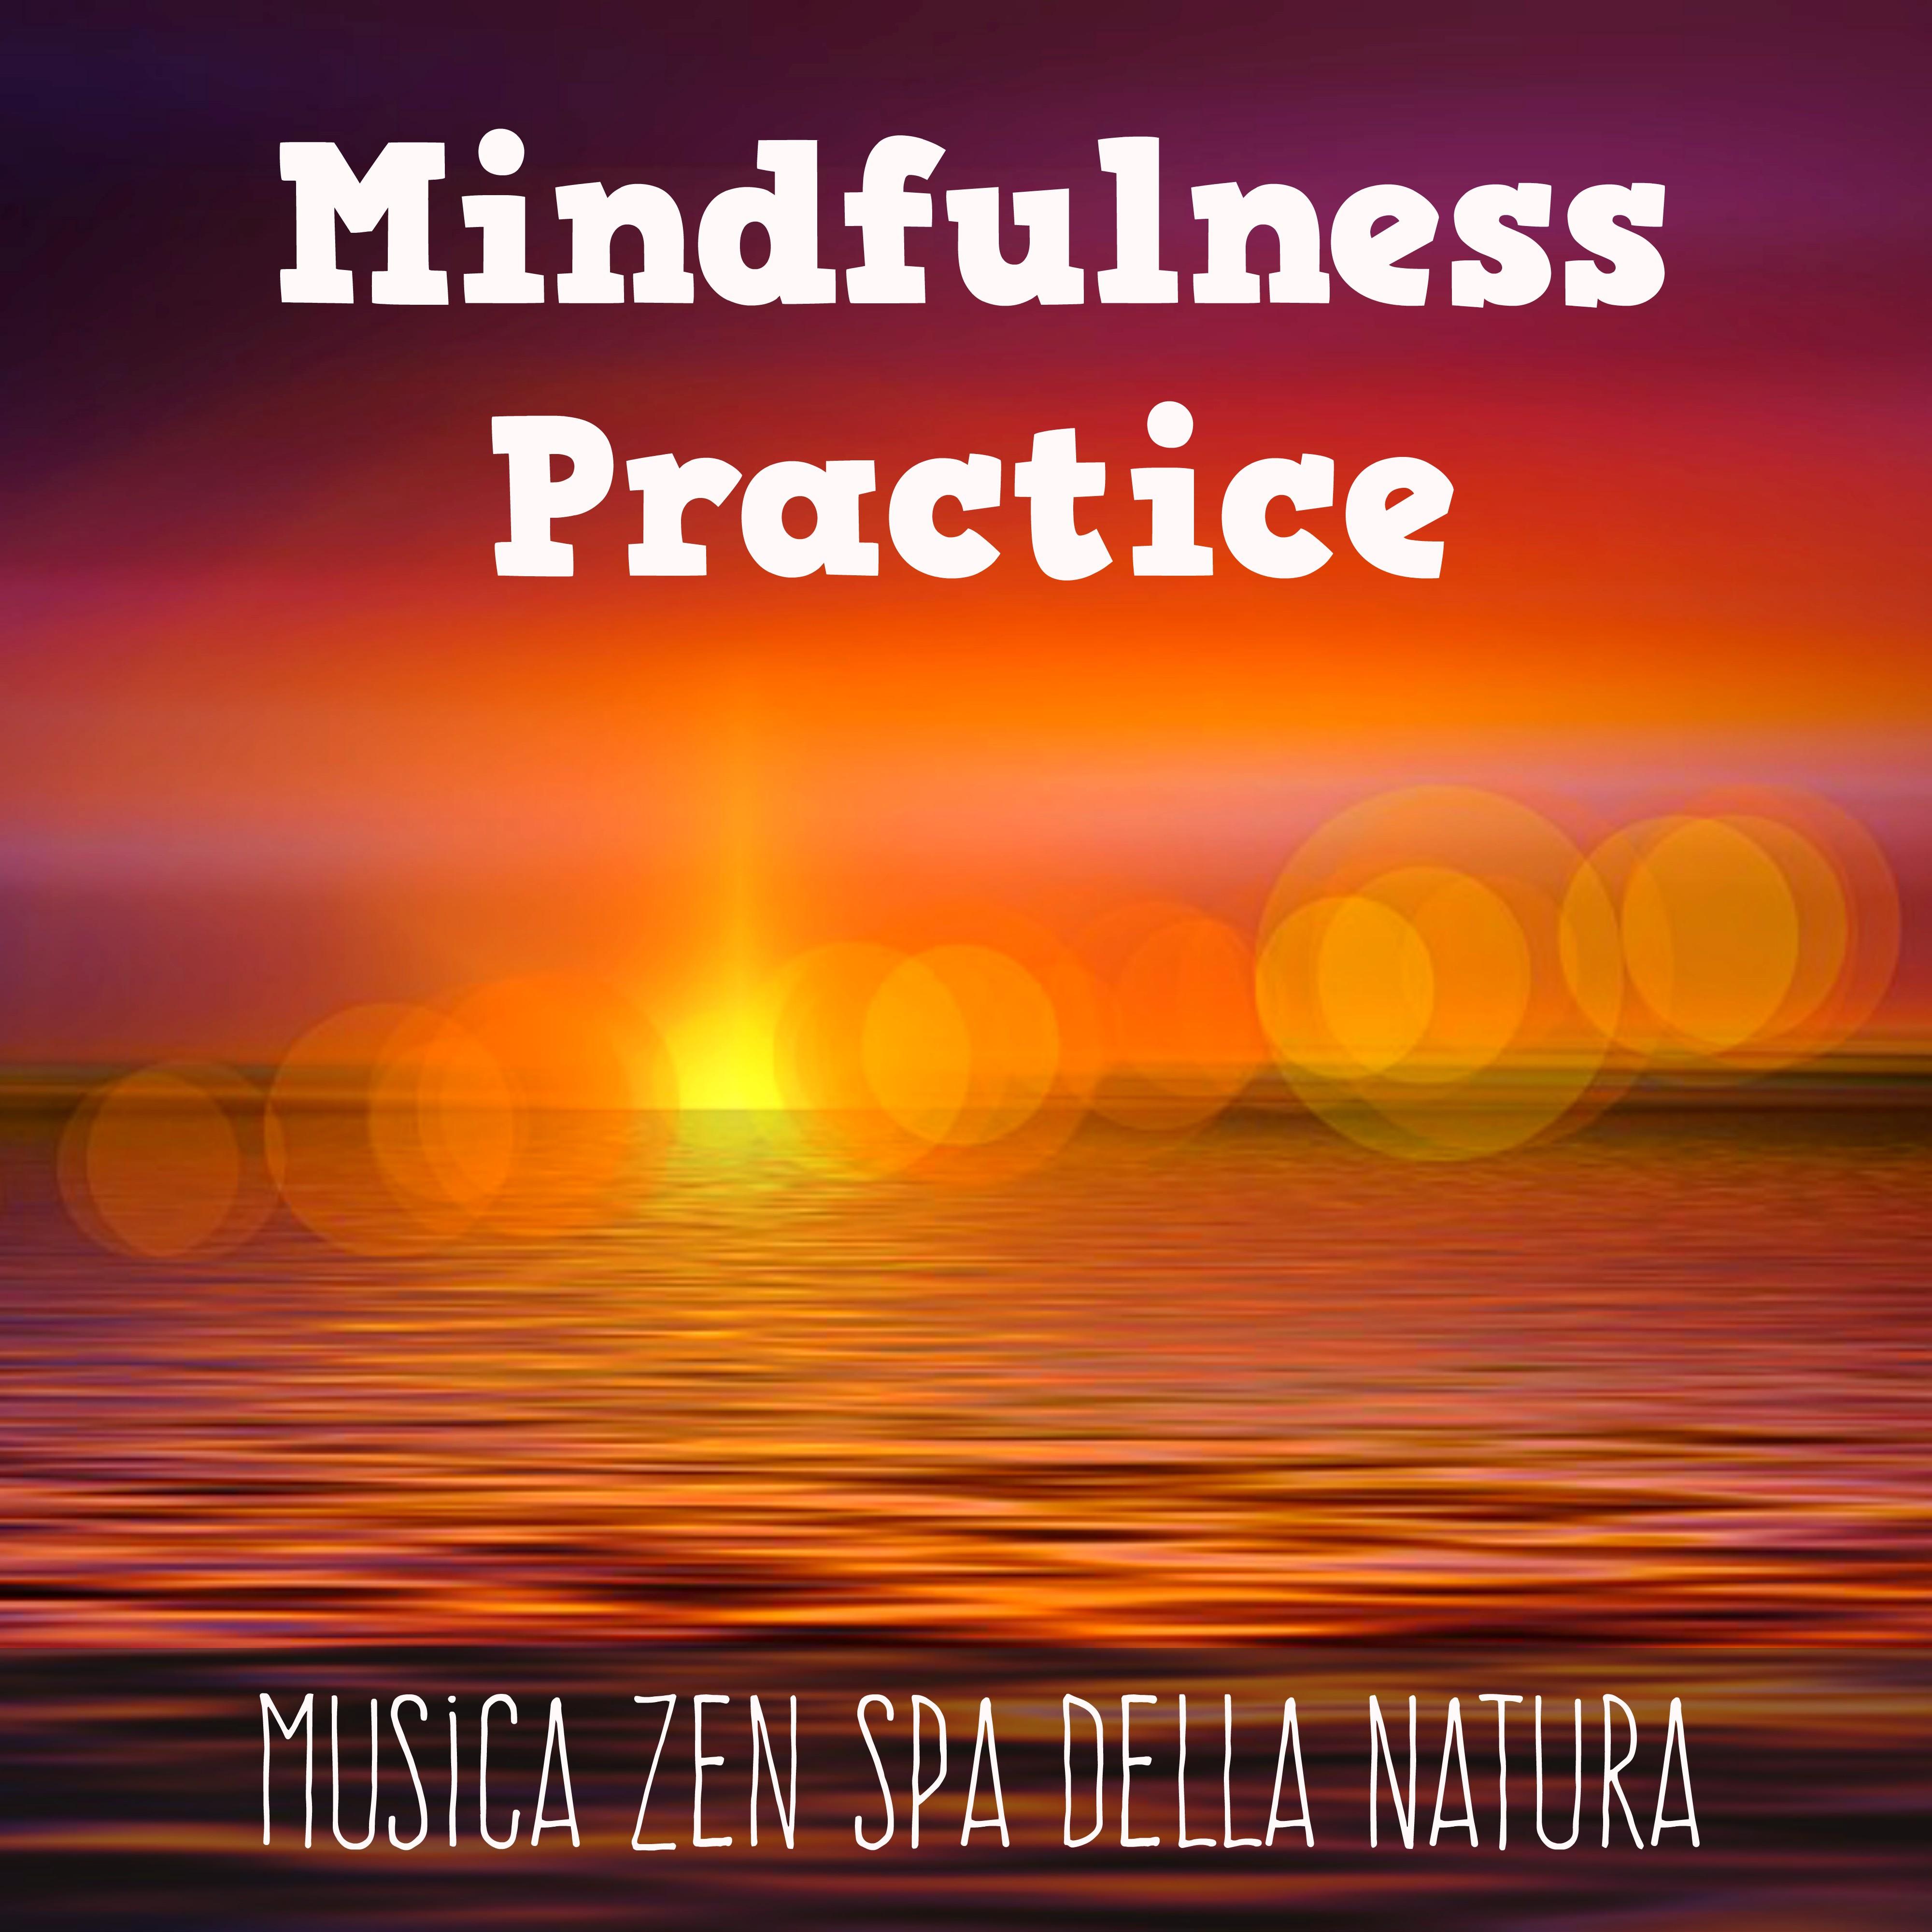 Guided Imagery in MIndfulness Meditation